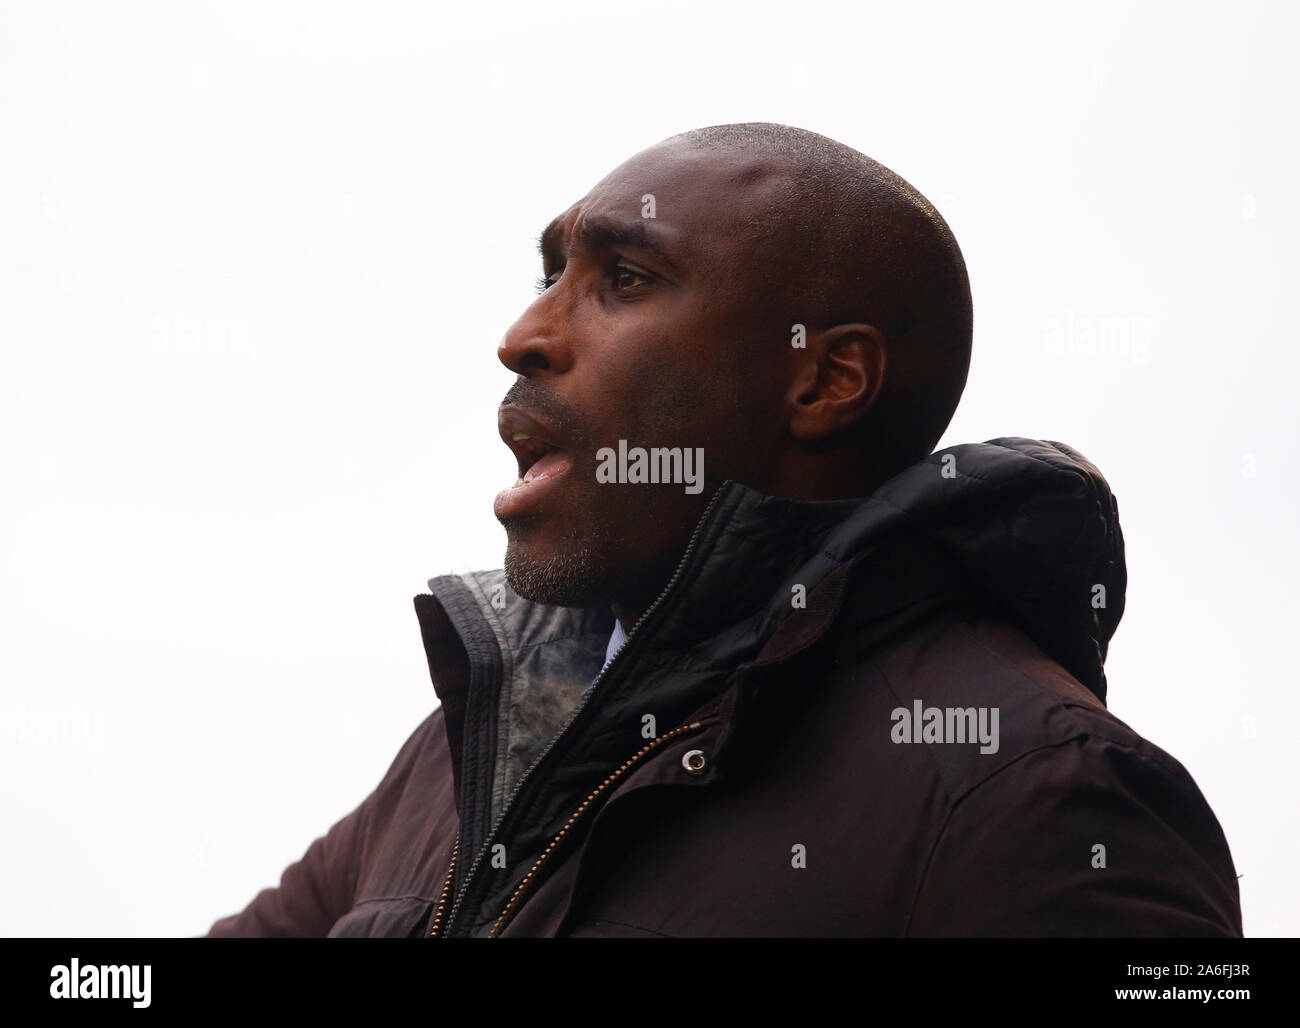 SOUTHEND UNITED KINGDOM. OCTOBER 26 Sol Campbell New manager of Southend United during English Sky Bet League One between Southend United and Ipswich Town at Roots Hall Stadium, Southend, England on 26 October 2019 Credit: Action Foto Sport/Alamy Live News Stock Photo